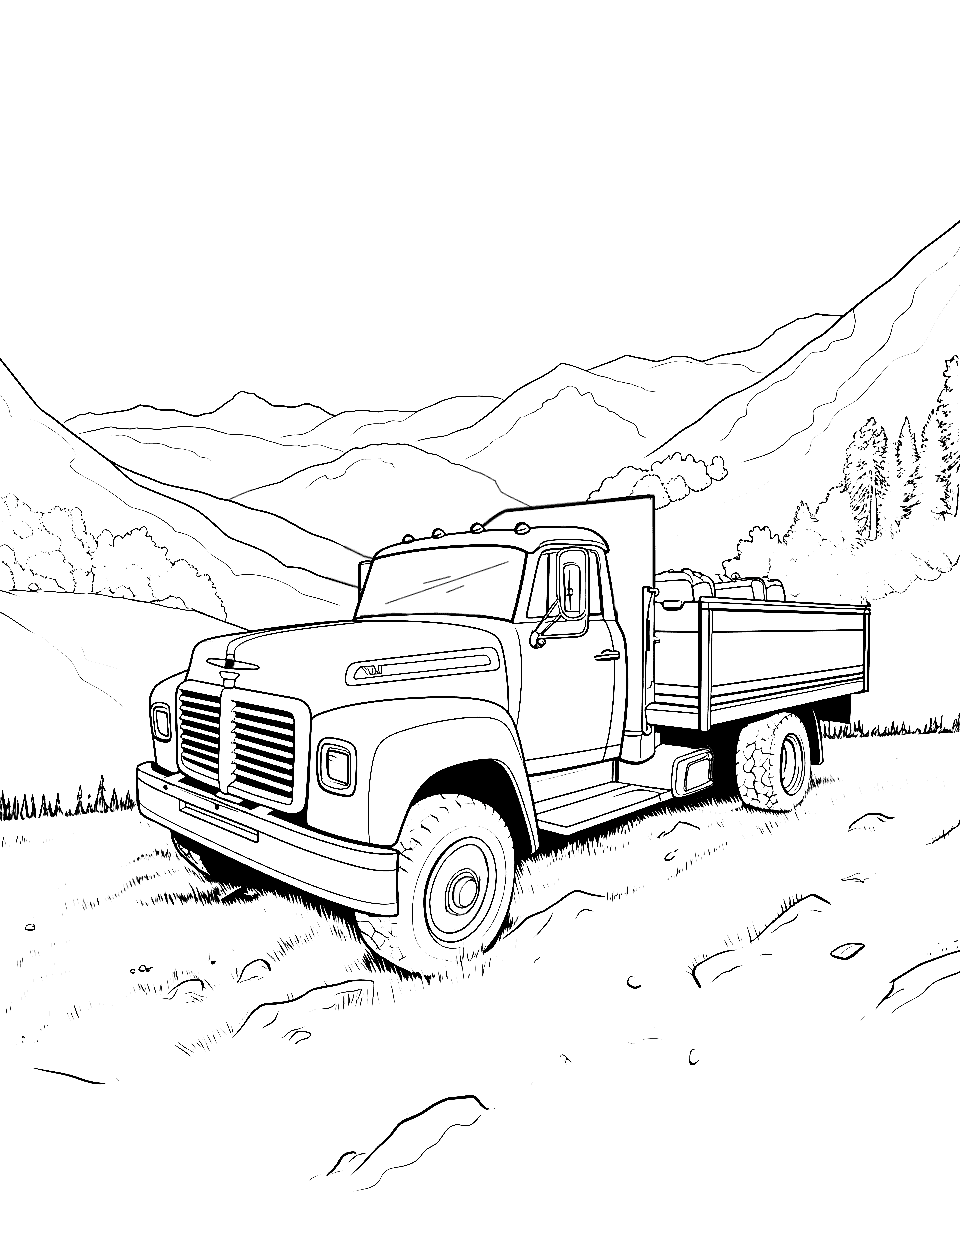 Pickup Truck on Hills Coloring Page - A pickup truck navigating over green, rolling hills.